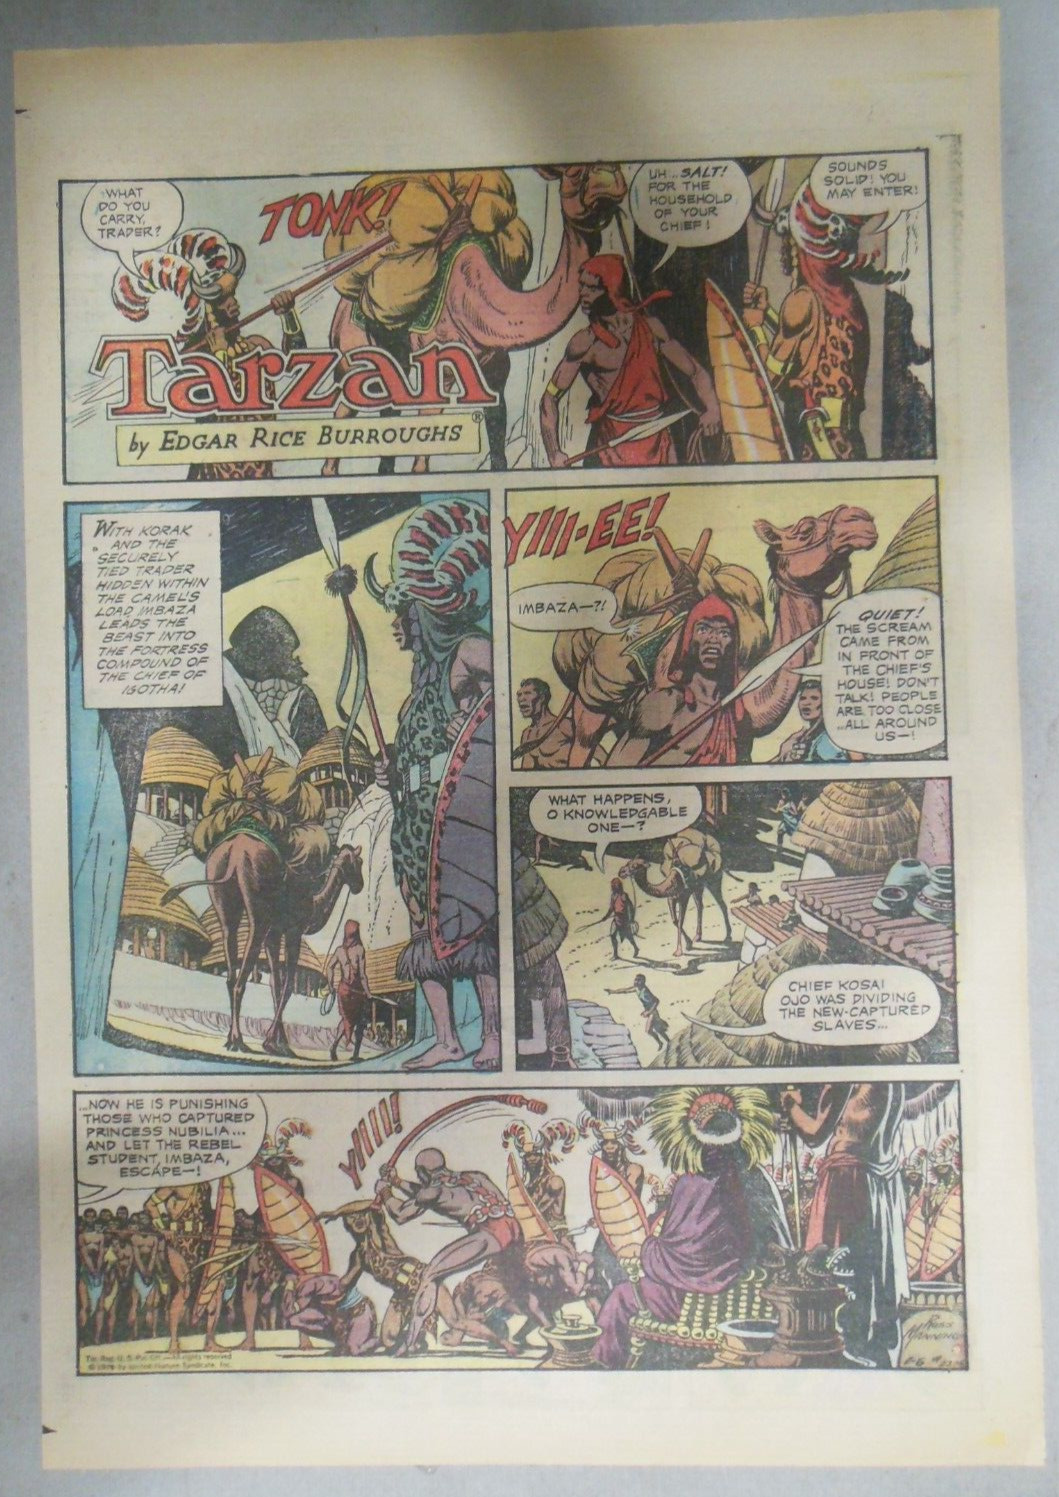 (43/52) Tarzan Sunday Pages  by Russ Manning from 1974 All Tabloid Page Size